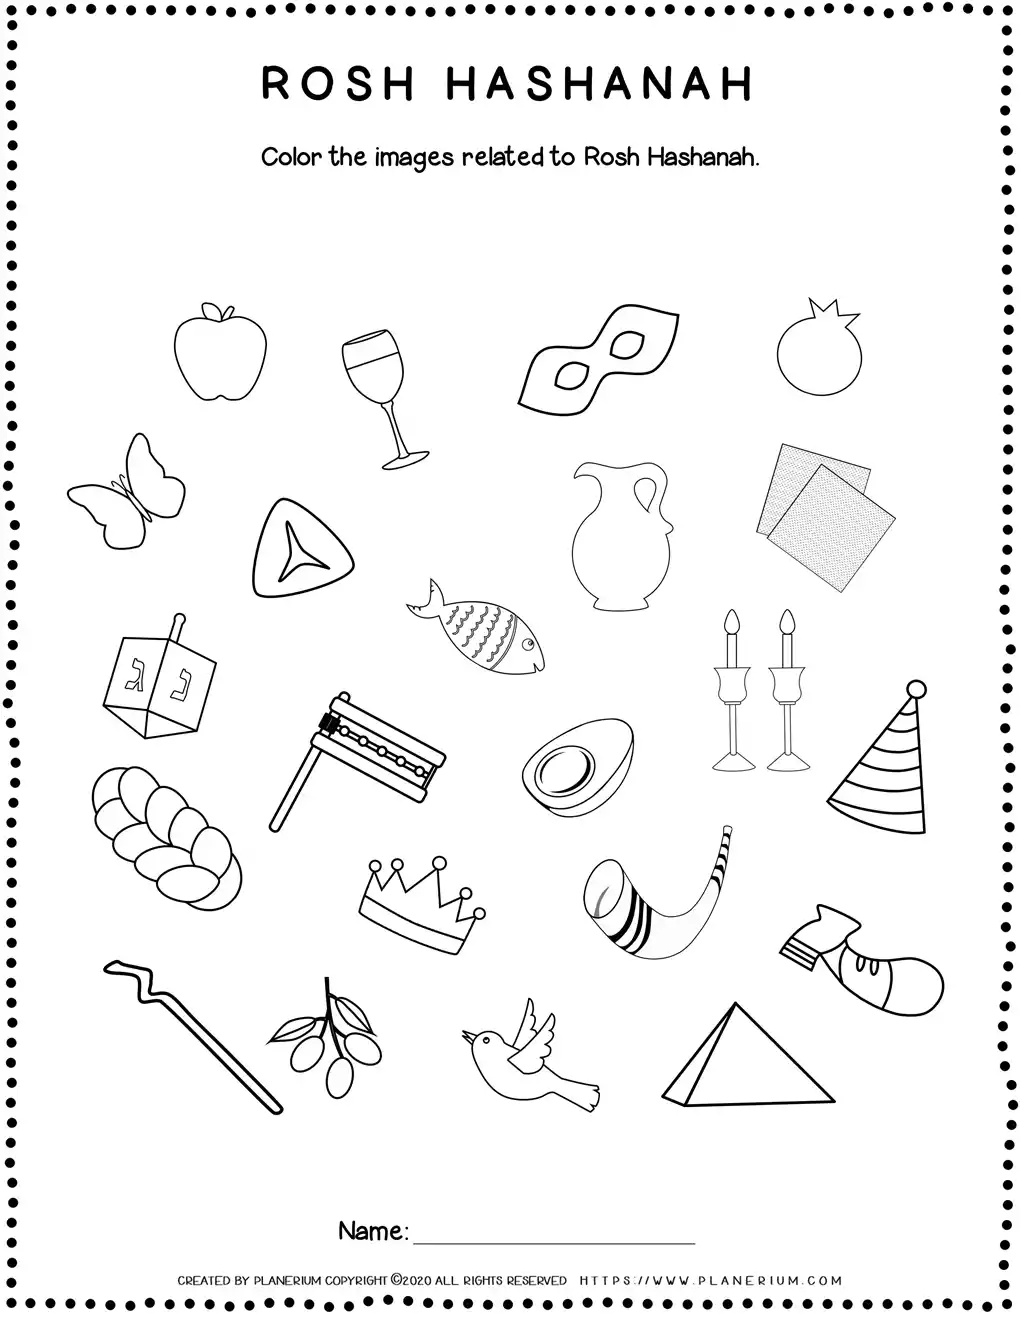 Rosh Hashanah - Worksheets - Color Related Images in Hebrew | Planerium